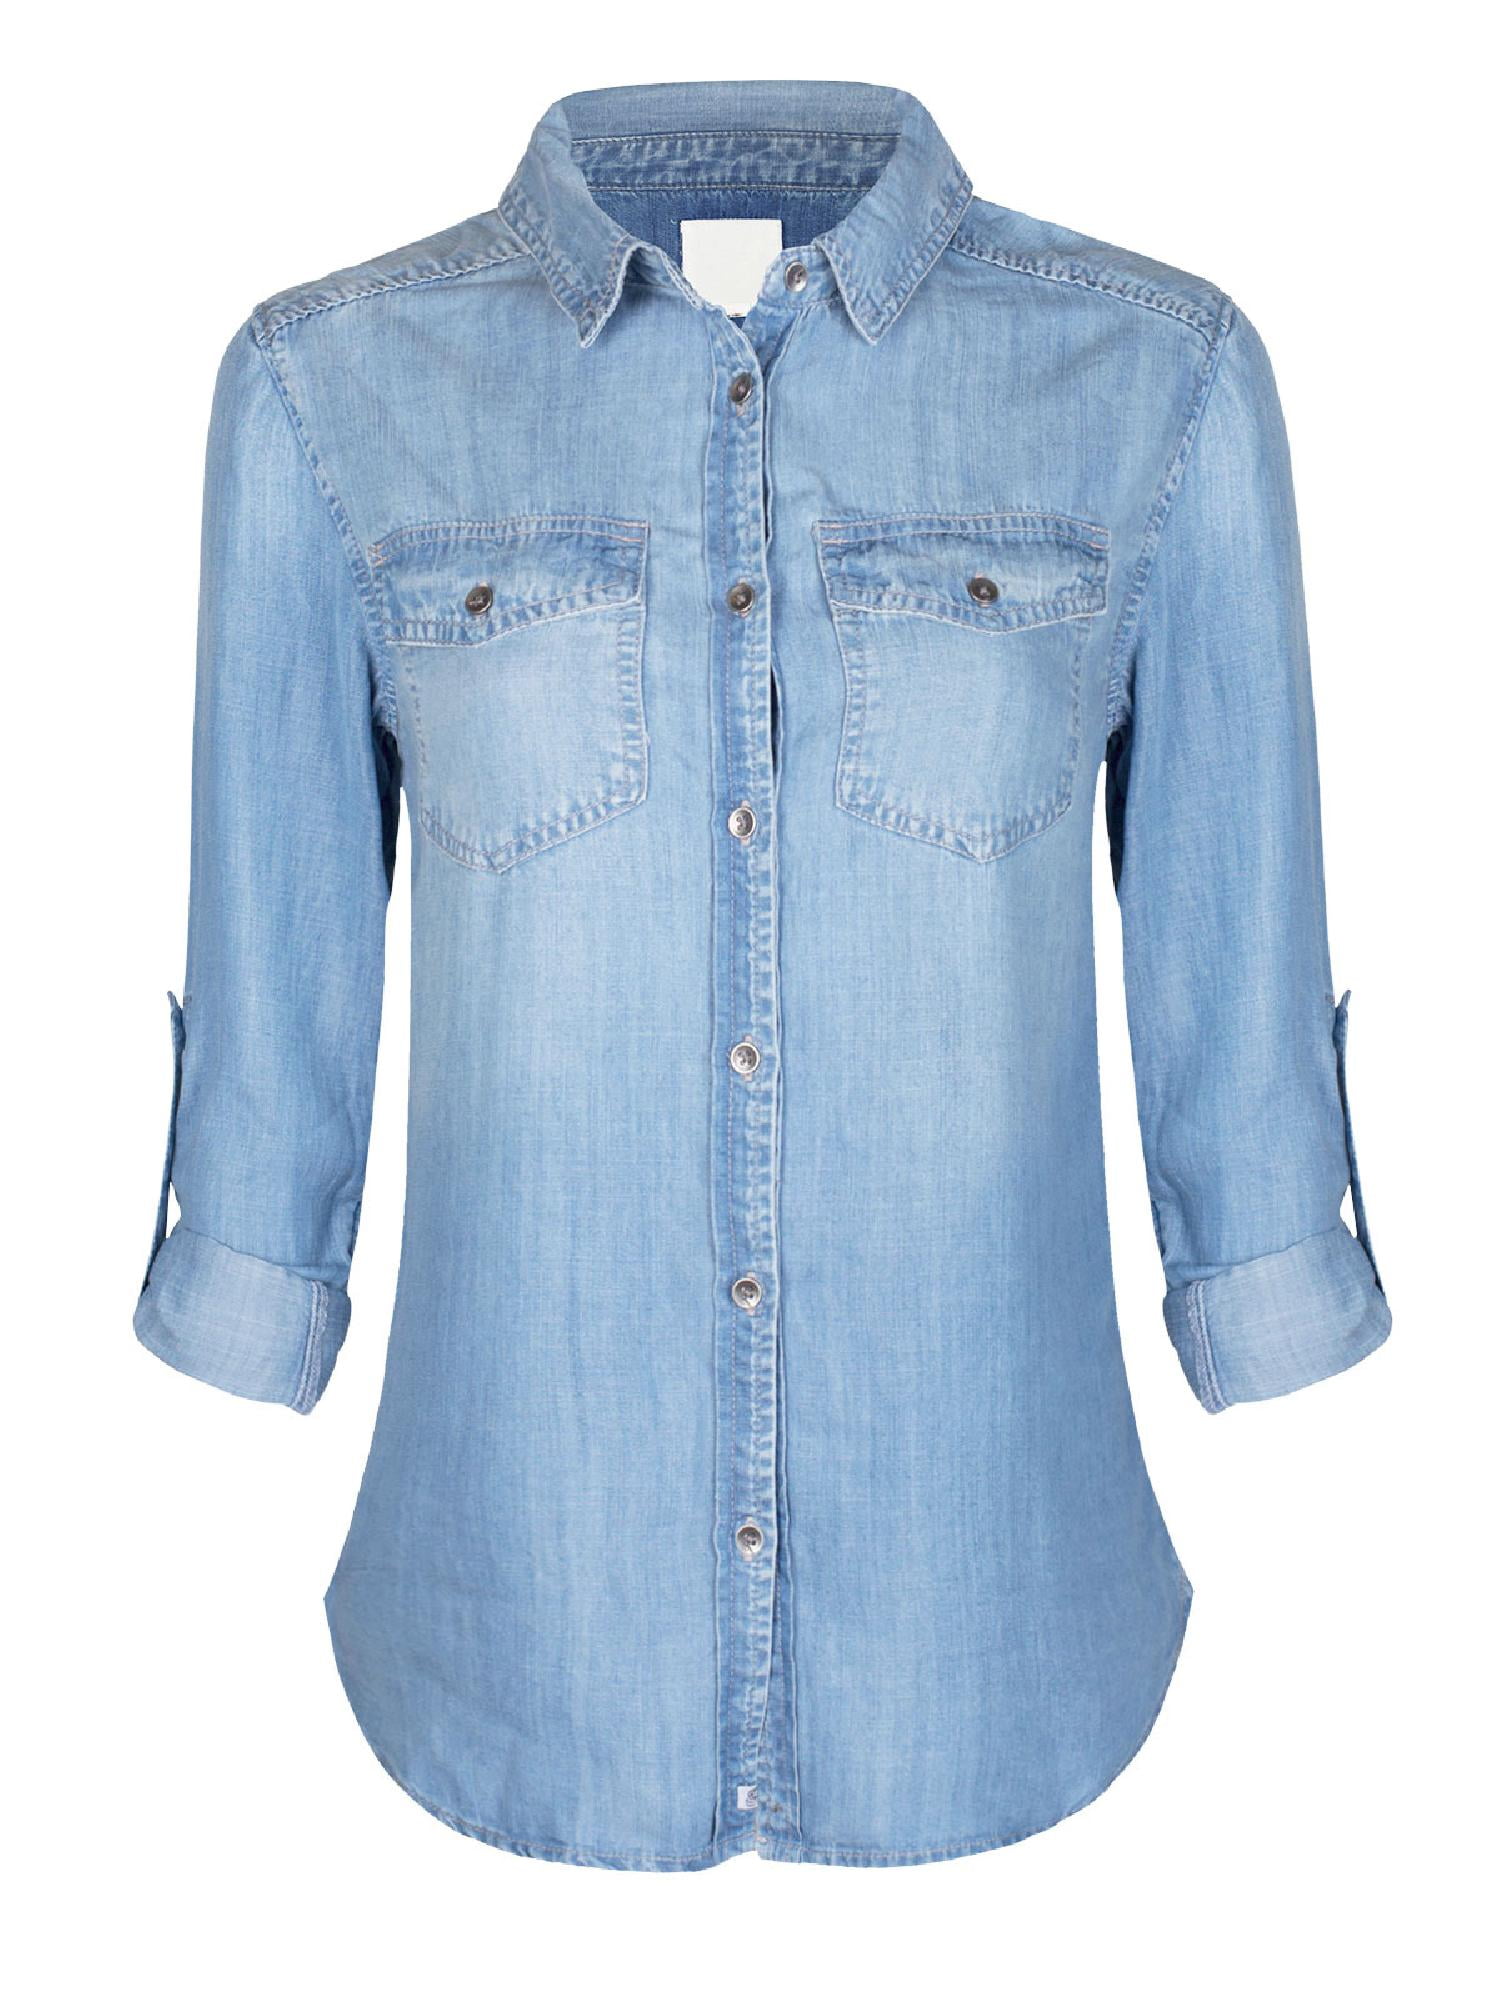 Buy Made by Olivia Womens Classic LongRoll Up Sleeve Button Down Denim ...